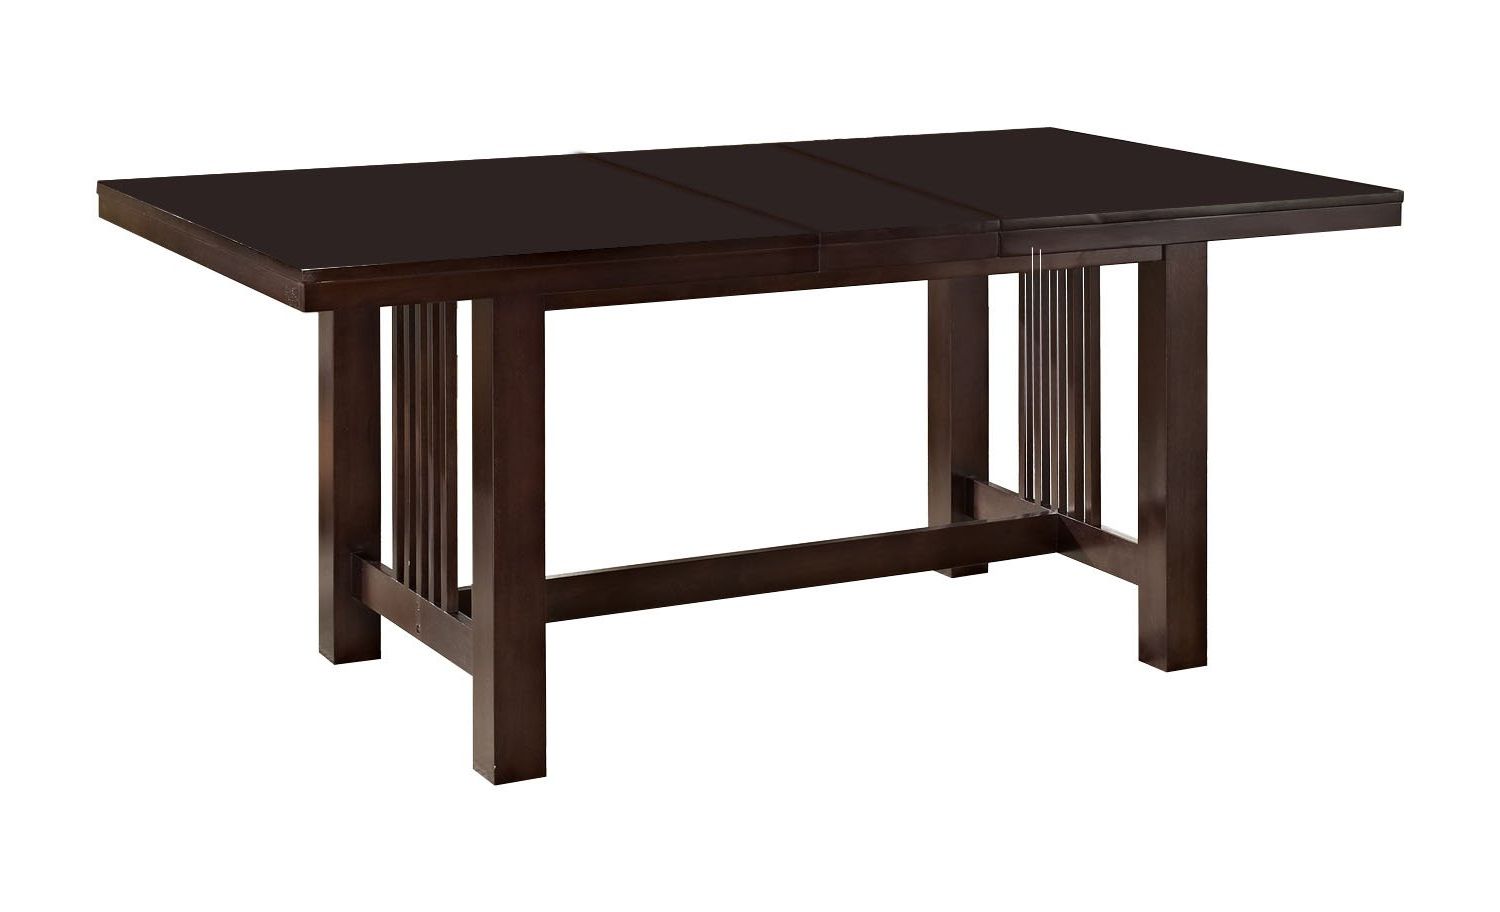 Wood Kitchen Dining Tables With Removable Center Leaf For Preferred Amazon – Offex Cappuccino Wood Kitchen Dining Table With (Photo 1 of 25)